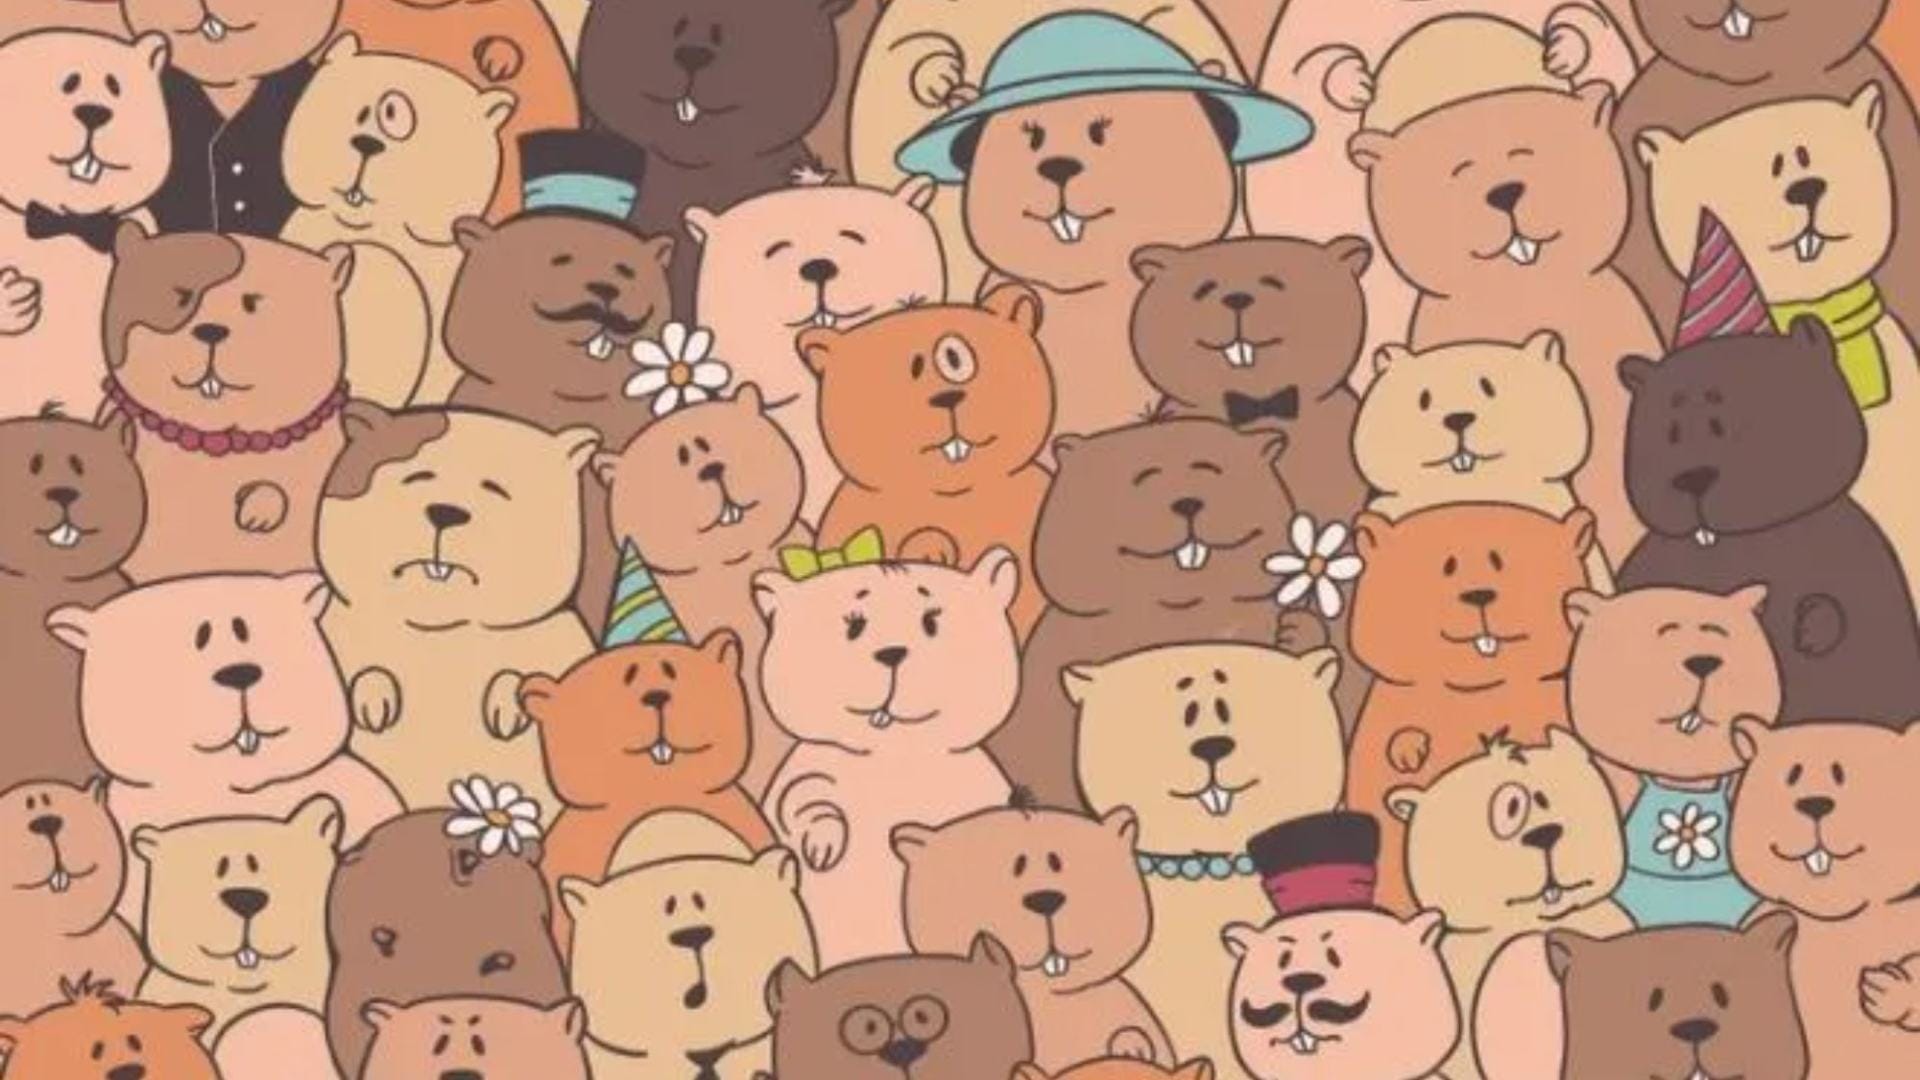 You have the eyes of a hawk if you see a potato hidden among bears in this optical illusion in five seconds.